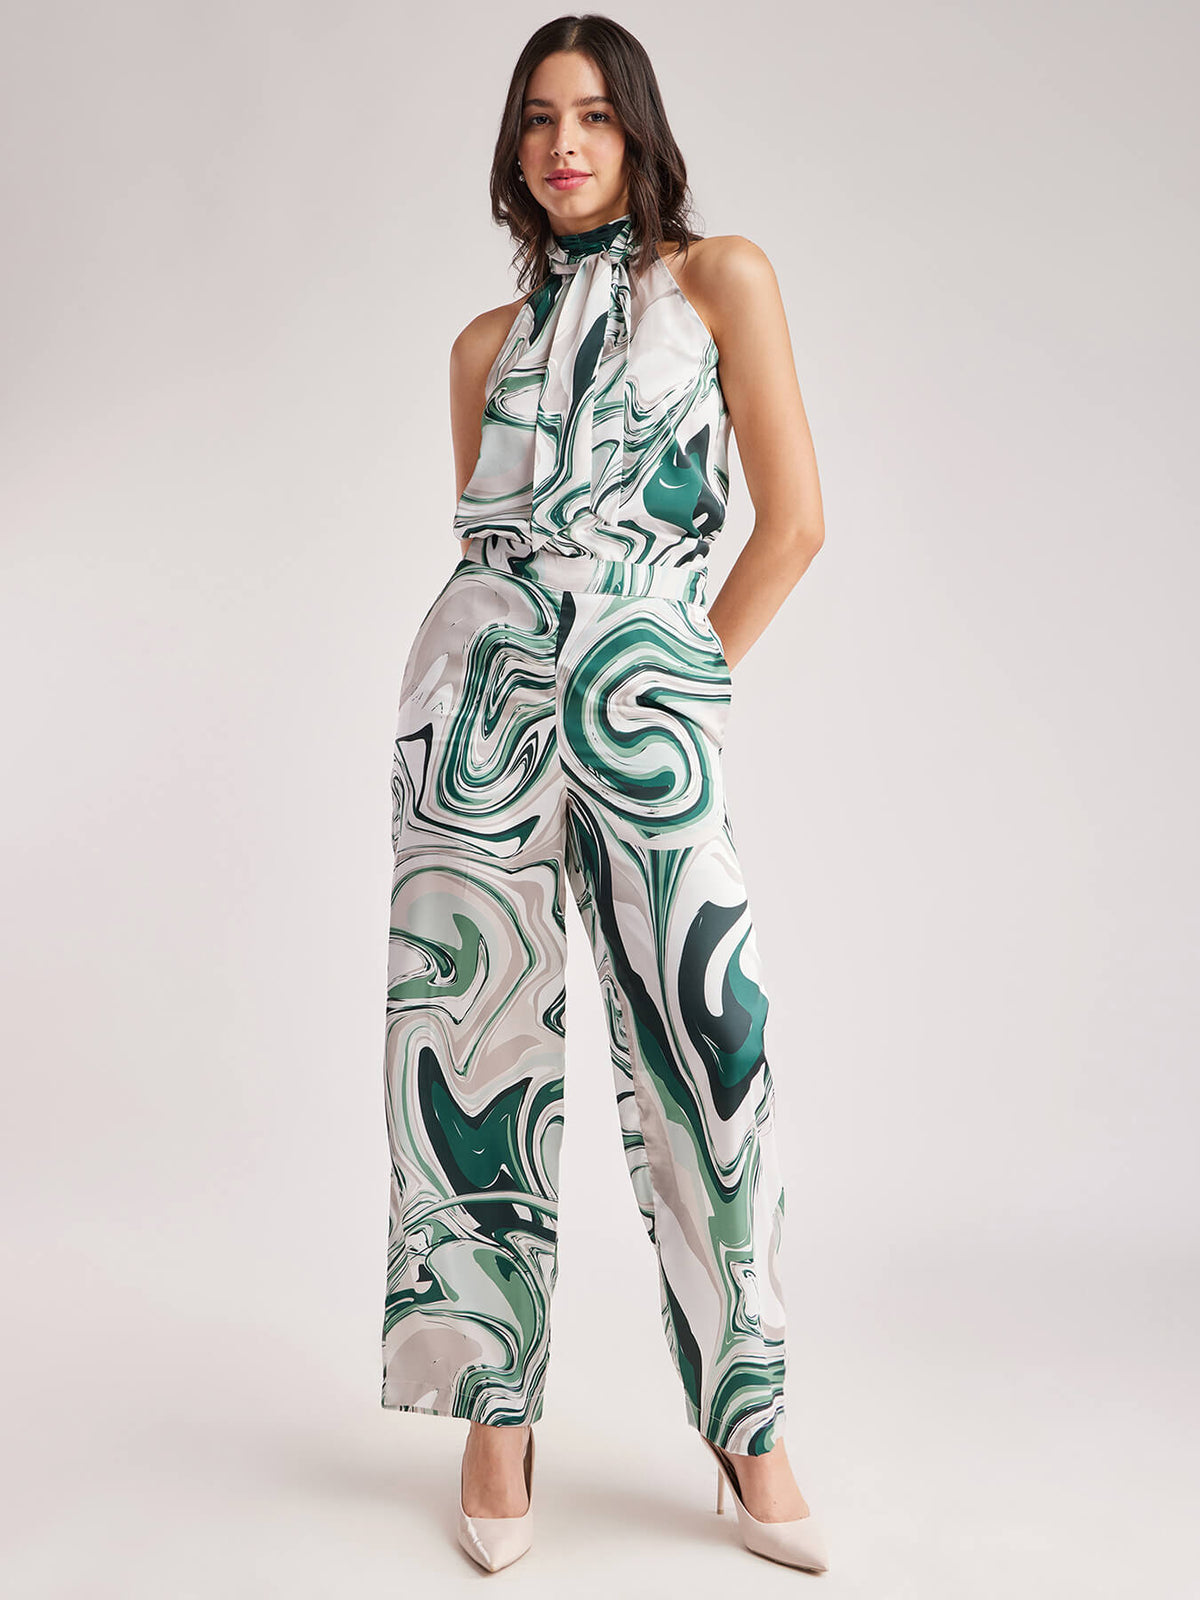 Marble Print Top And Trouser Coord - Green And Grey